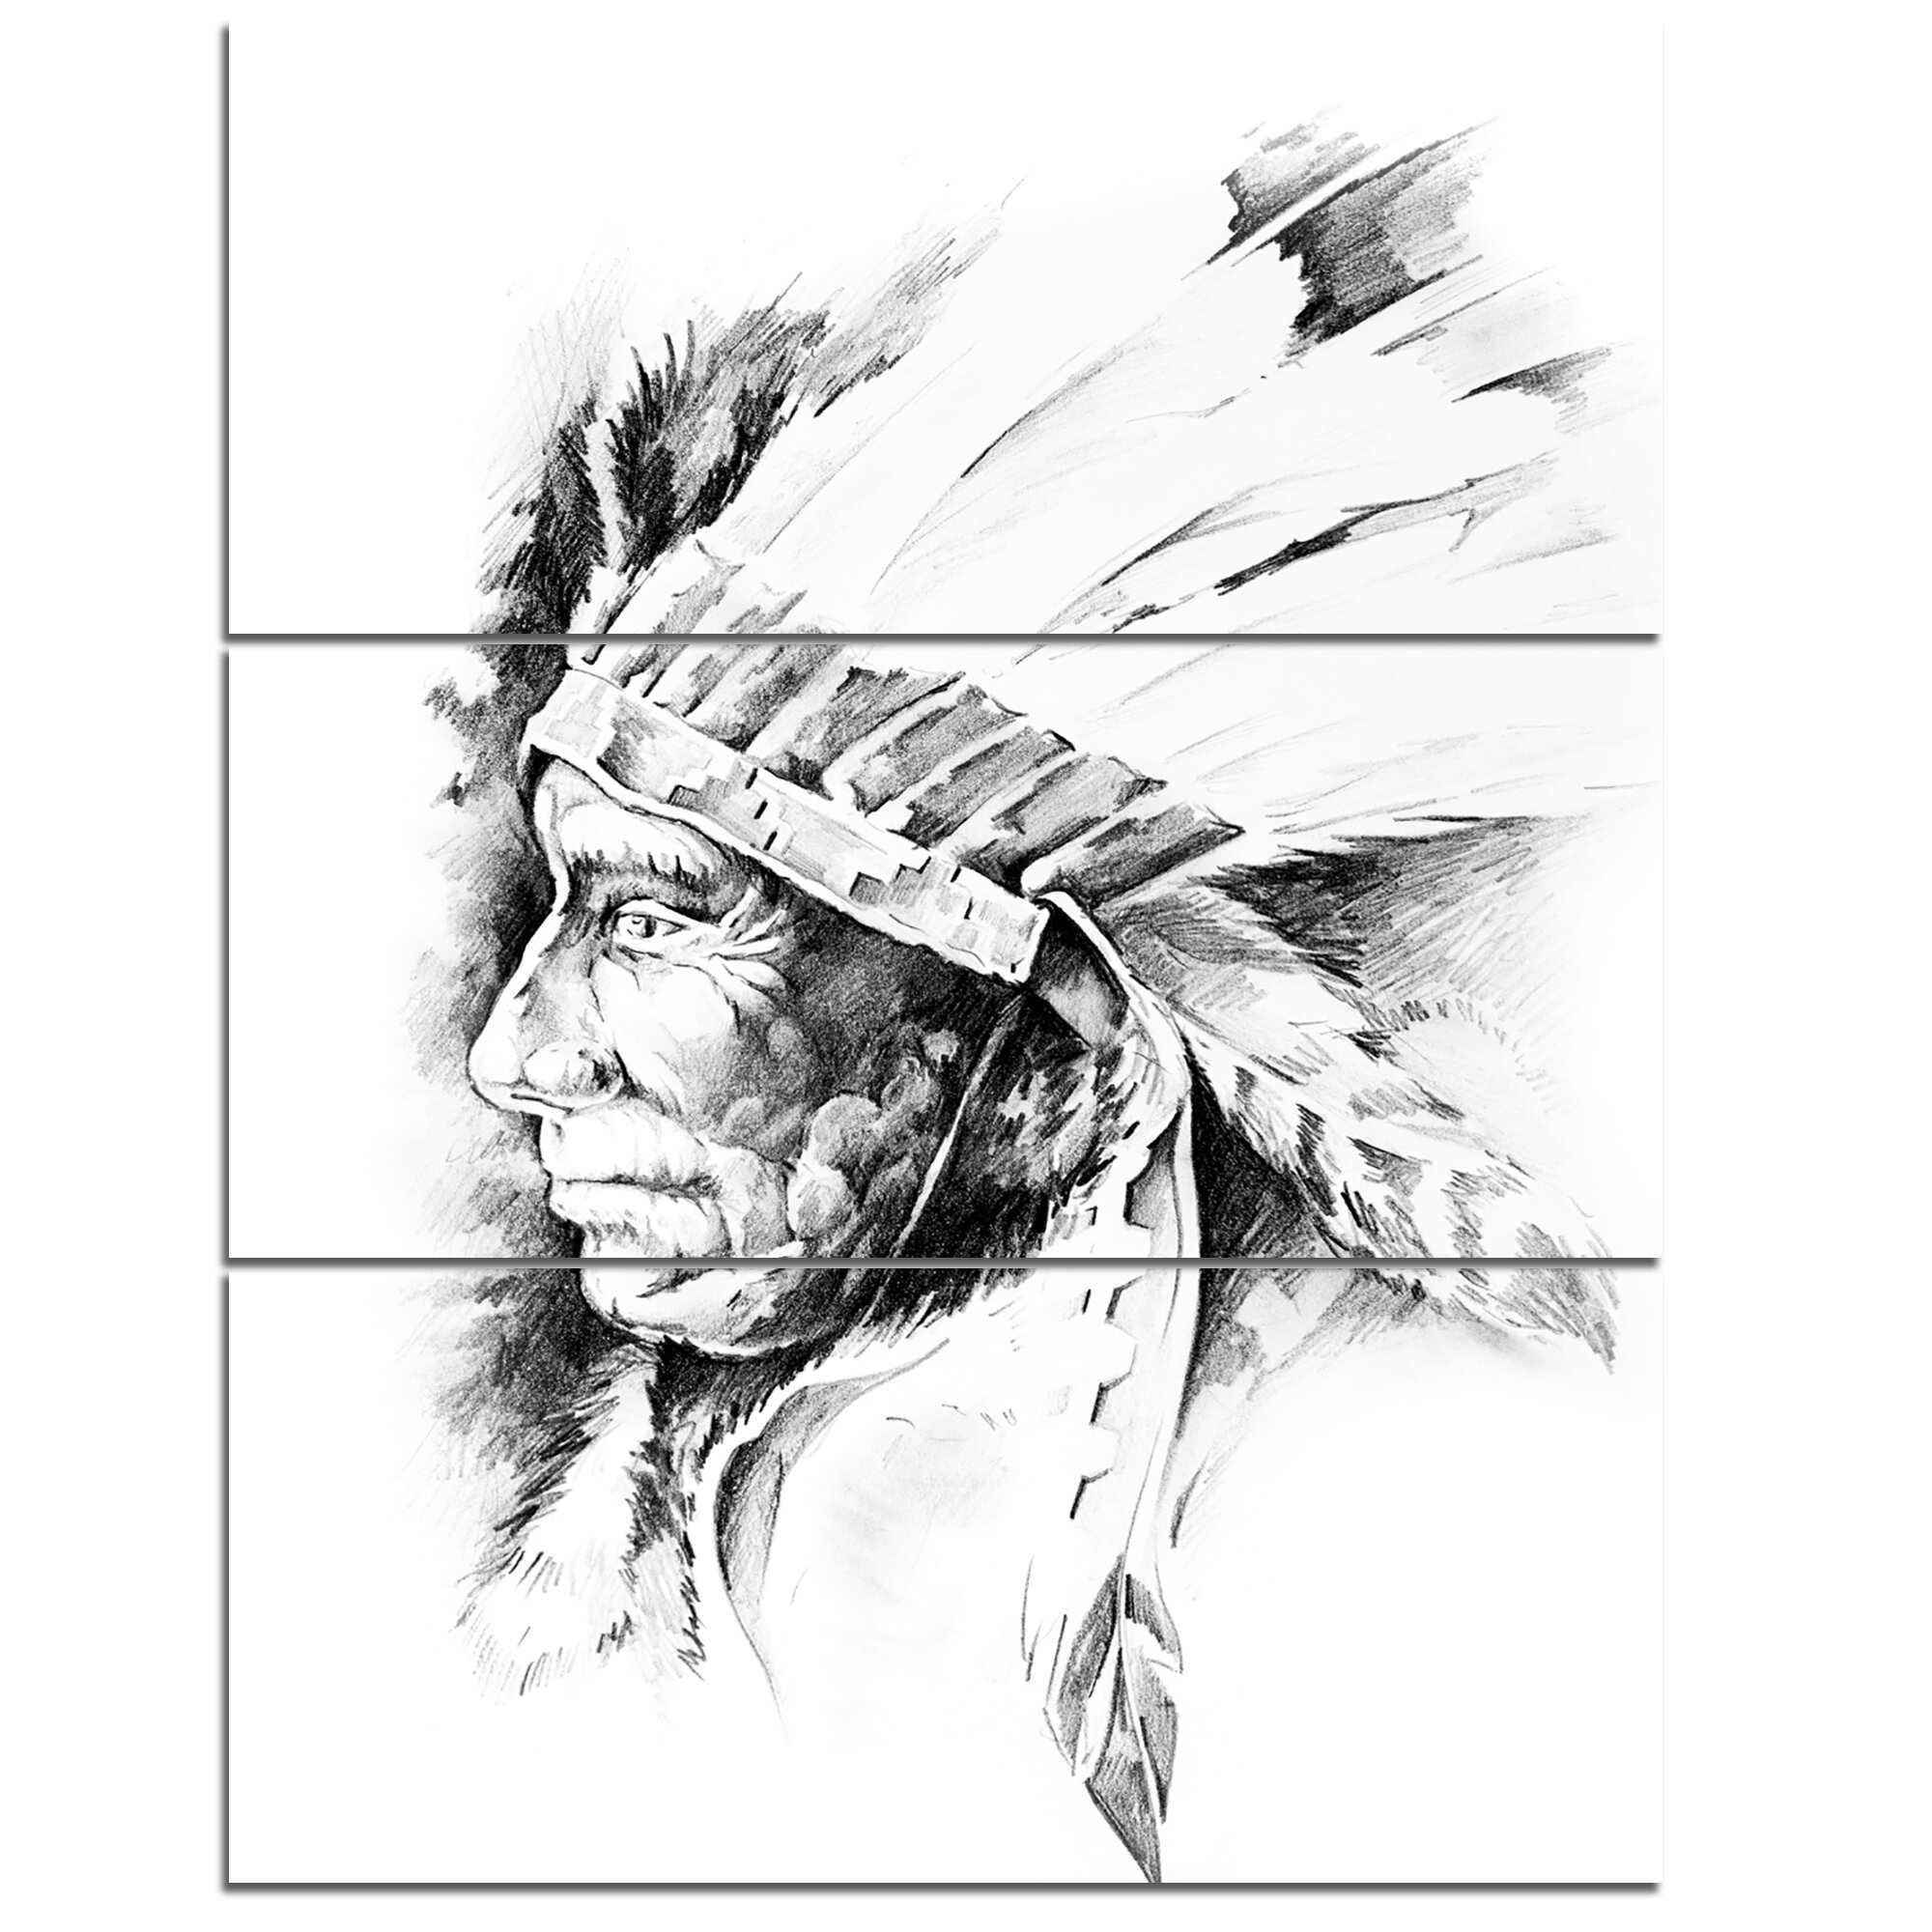 Designart American Indian Head Tattoo Black And White 3 Piece Wall Art On Wrapped Canvas Set Wayfair Ca